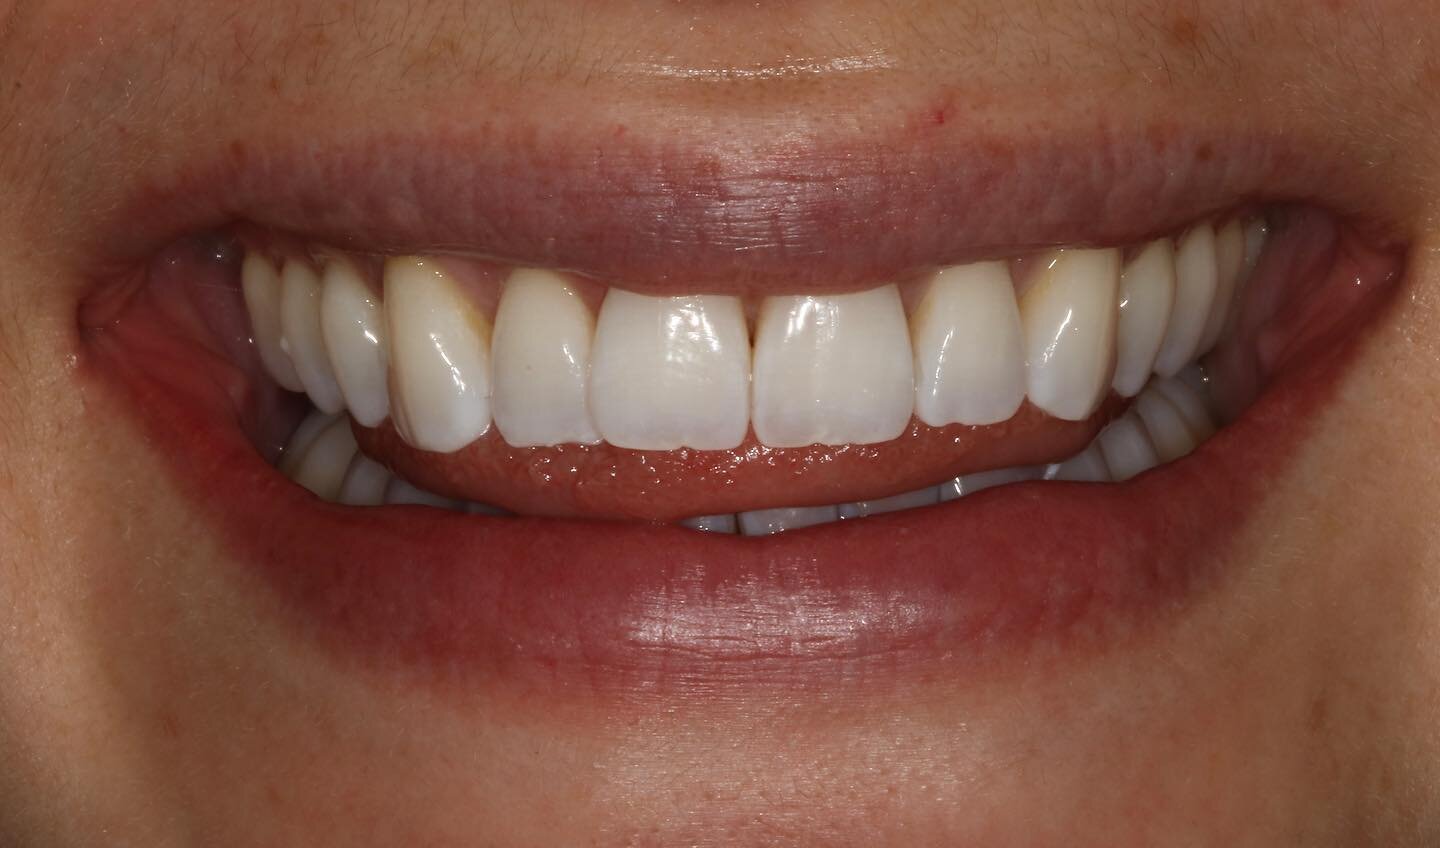 Brightening up for spring. After|Before. 🌷
.
.
.
#teethwhitening #vancouverdentist #smile #whiteteeth #vancity #oralhealth #selfcare